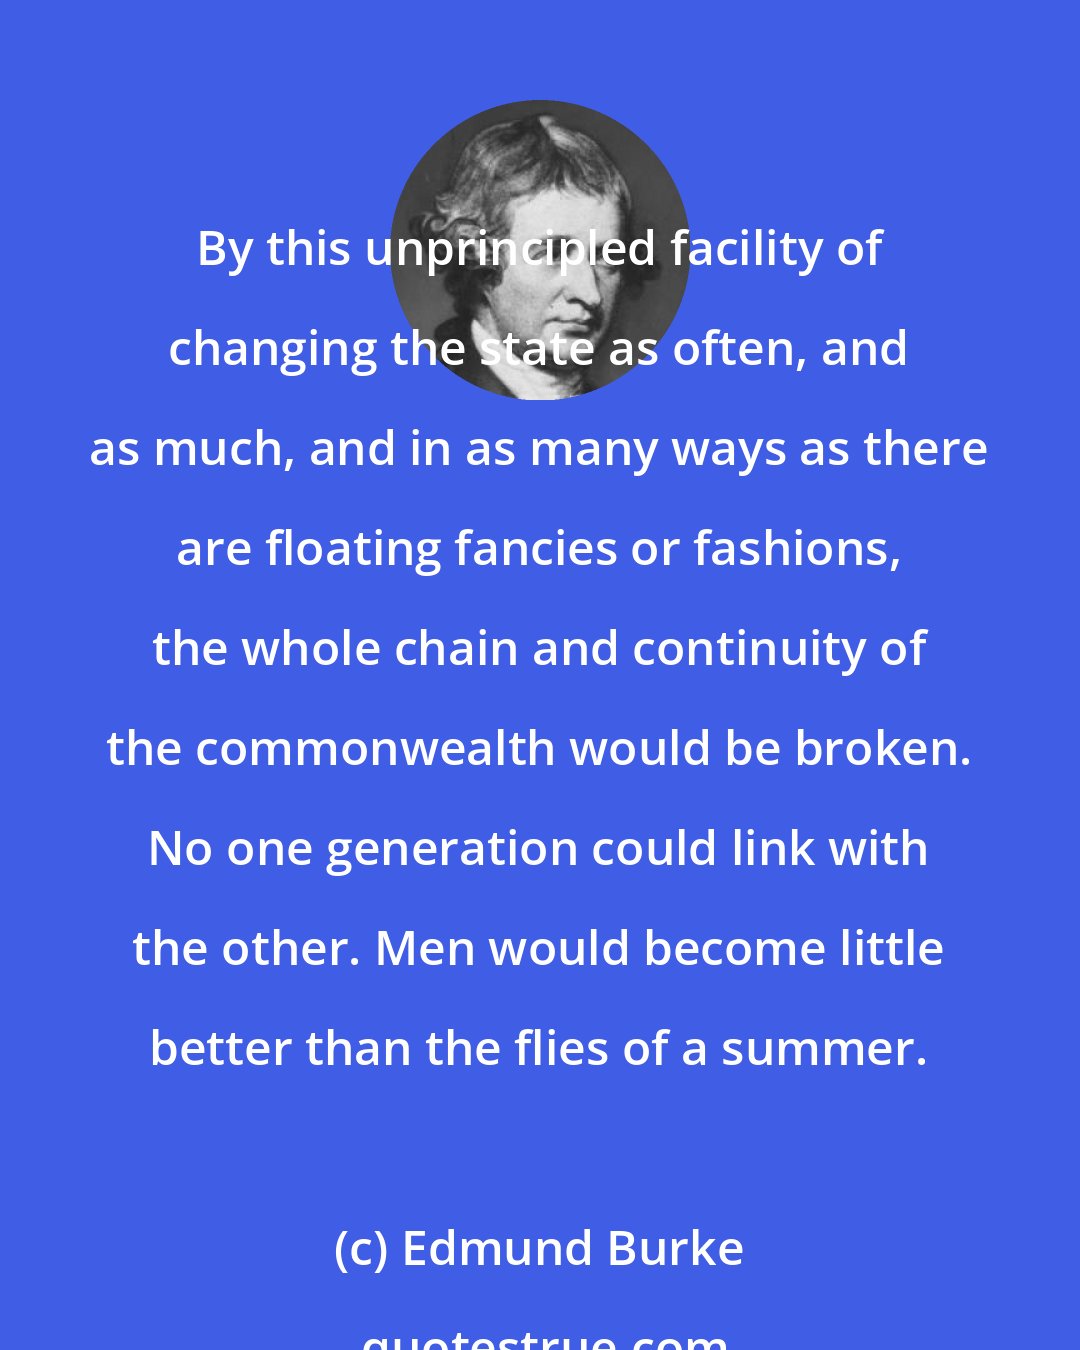 Edmund Burke: By this unprincipled facility of changing the state as often, and as much, and in as many ways as there are floating fancies or fashions, the whole chain and continuity of the commonwealth would be broken. No one generation could link with the other. Men would become little better than the flies of a summer.